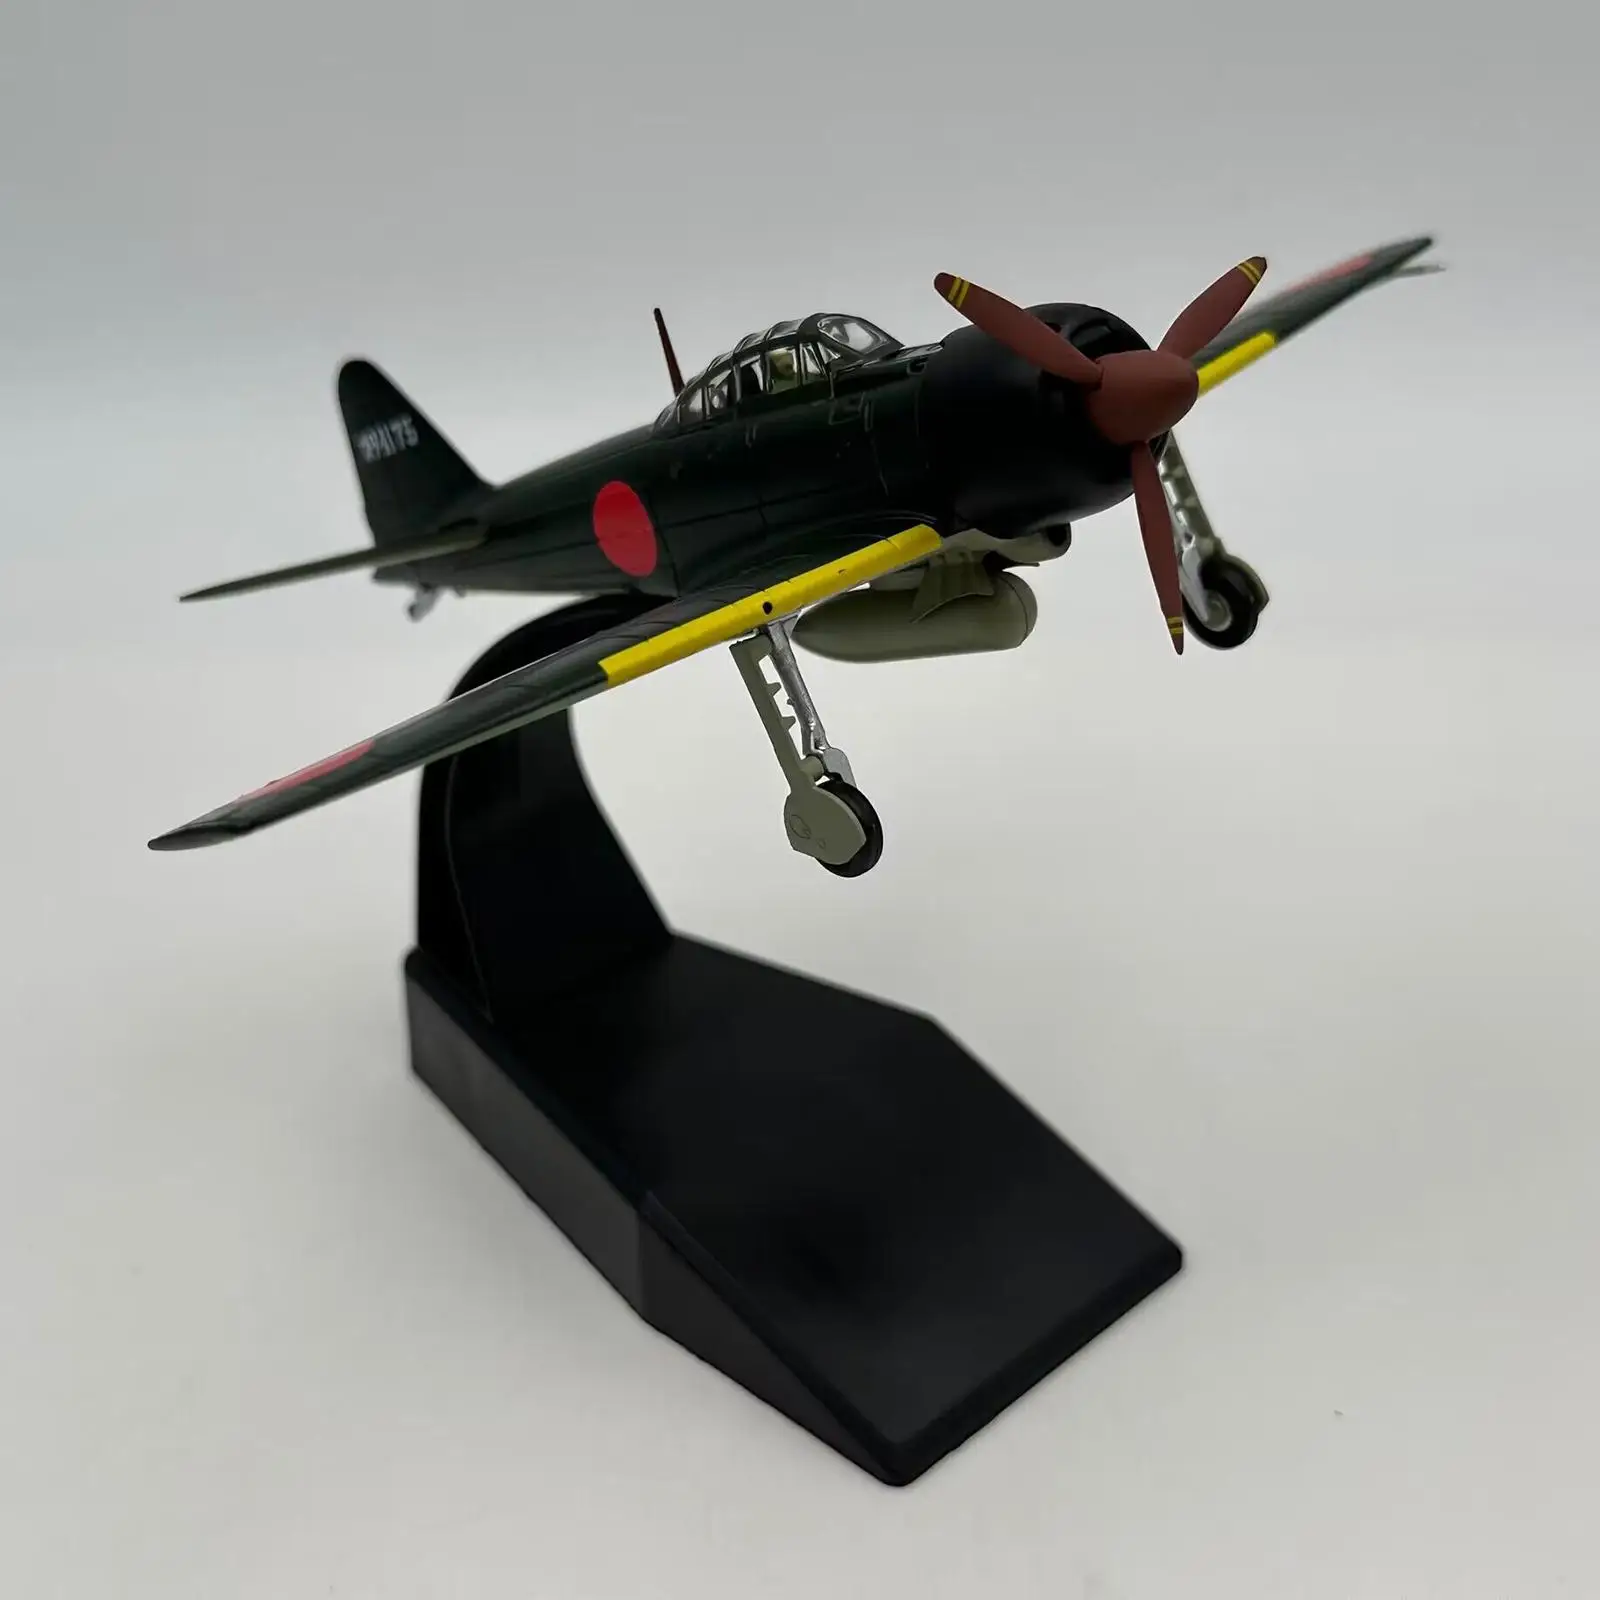 1/72 Alloy Plane Model Display Ornaments Collectables Ornaments Aircraft Plane Model for Desktop Office Bedroom Table Ornament